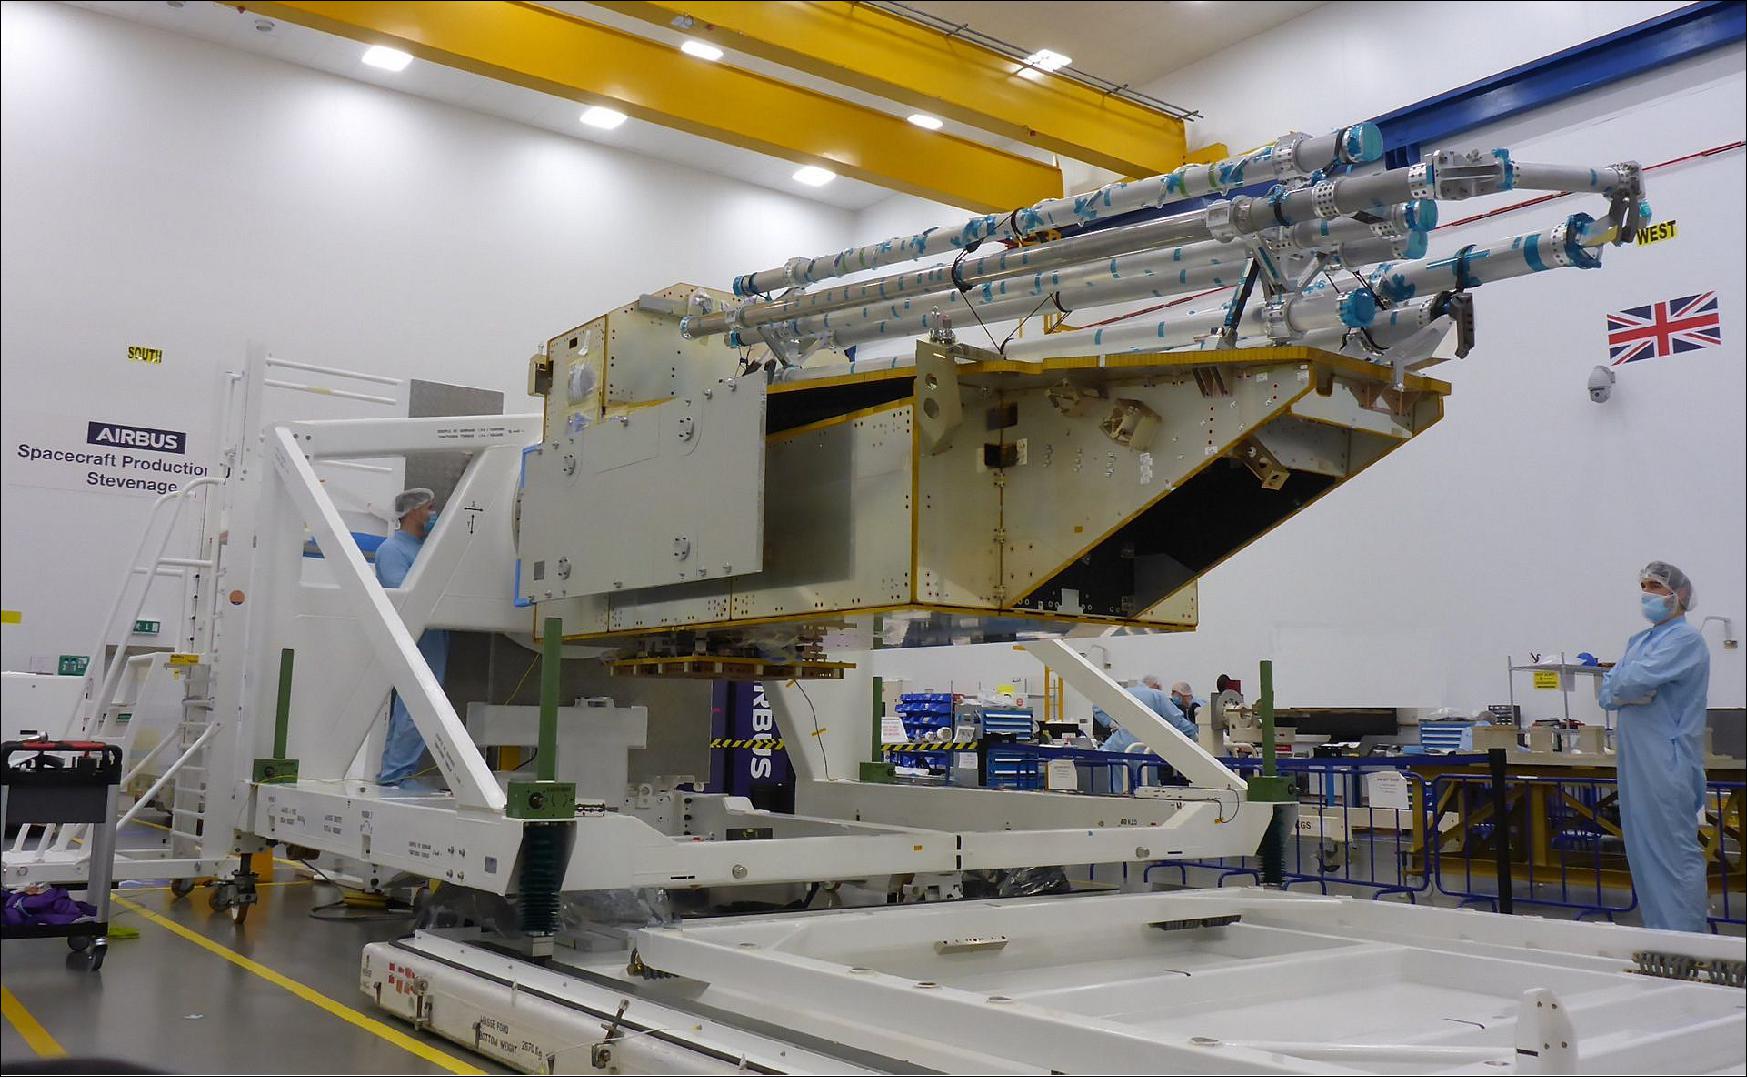 Figure 20: Biomass, ESA's forest measuring satellite, is taking shape at Airbus's site in Stevenage with the structure model platform completed. In line with UK government guidelines, the Stevenage site is COVID secure - enabling spacecraft production to continue safely (image credit: Airbus)